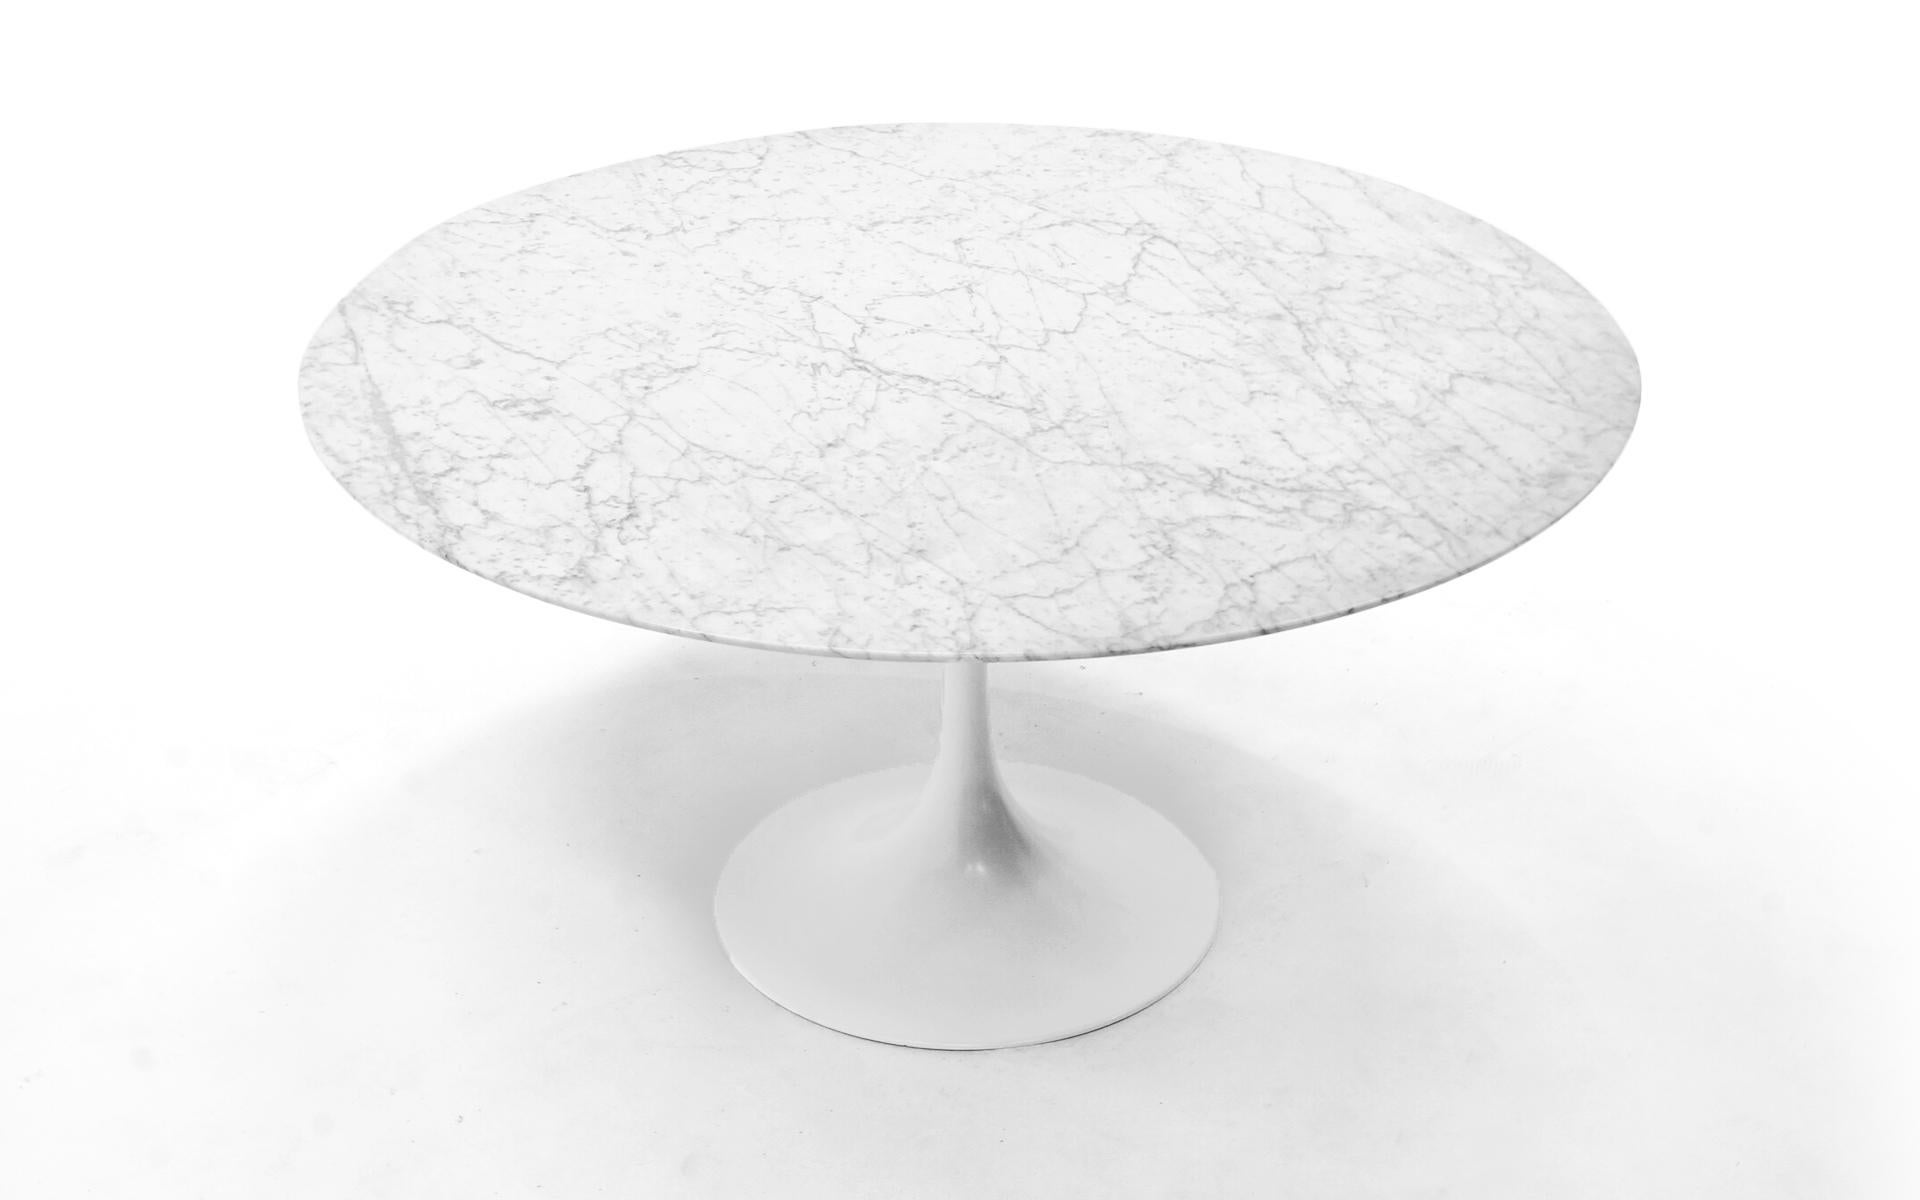 54 inch round white marble dining table designed by Eero Saarinen for Knoll. We acquired this example from a retired prominent Kansas City architect who originally purchased it new in London in the 1980s. Very good condition with few signs of light